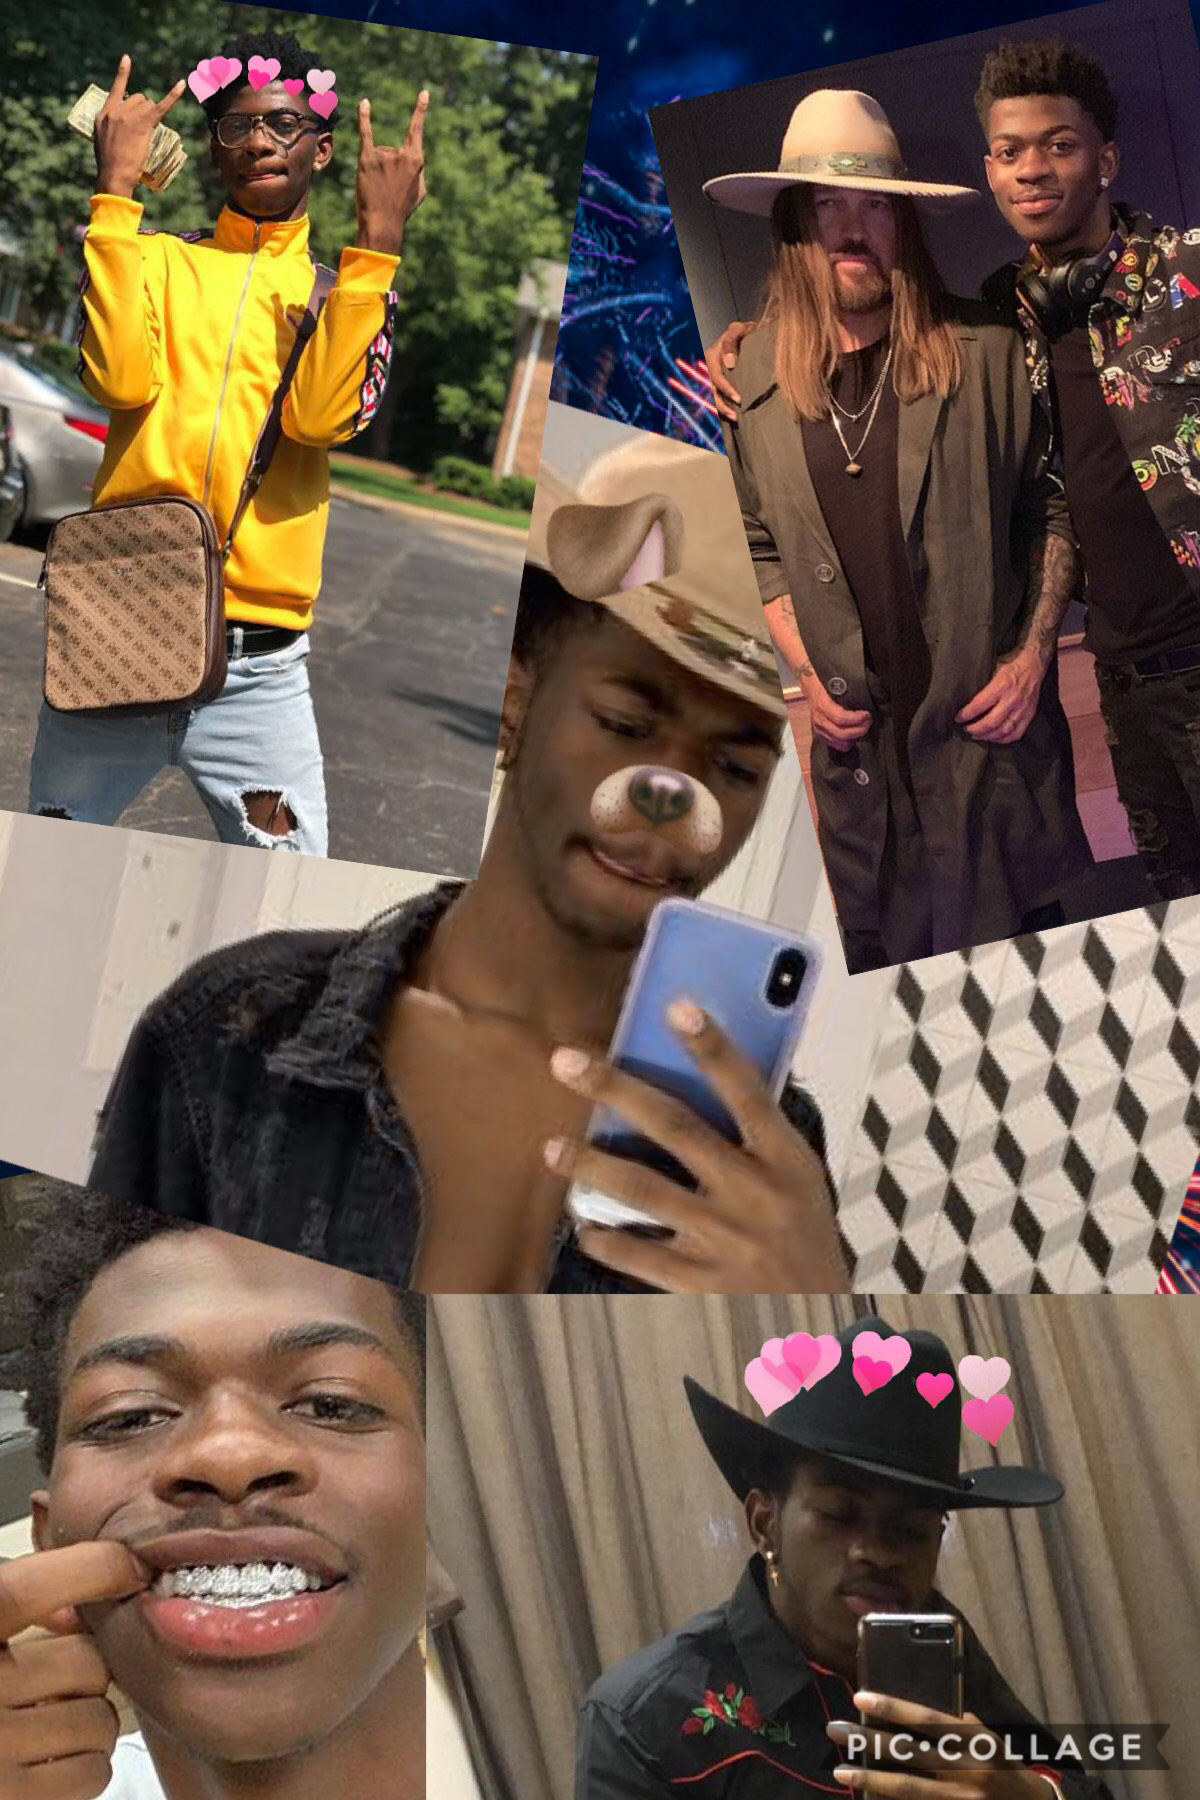 💕Lil nas X edit with snapchat filters💕